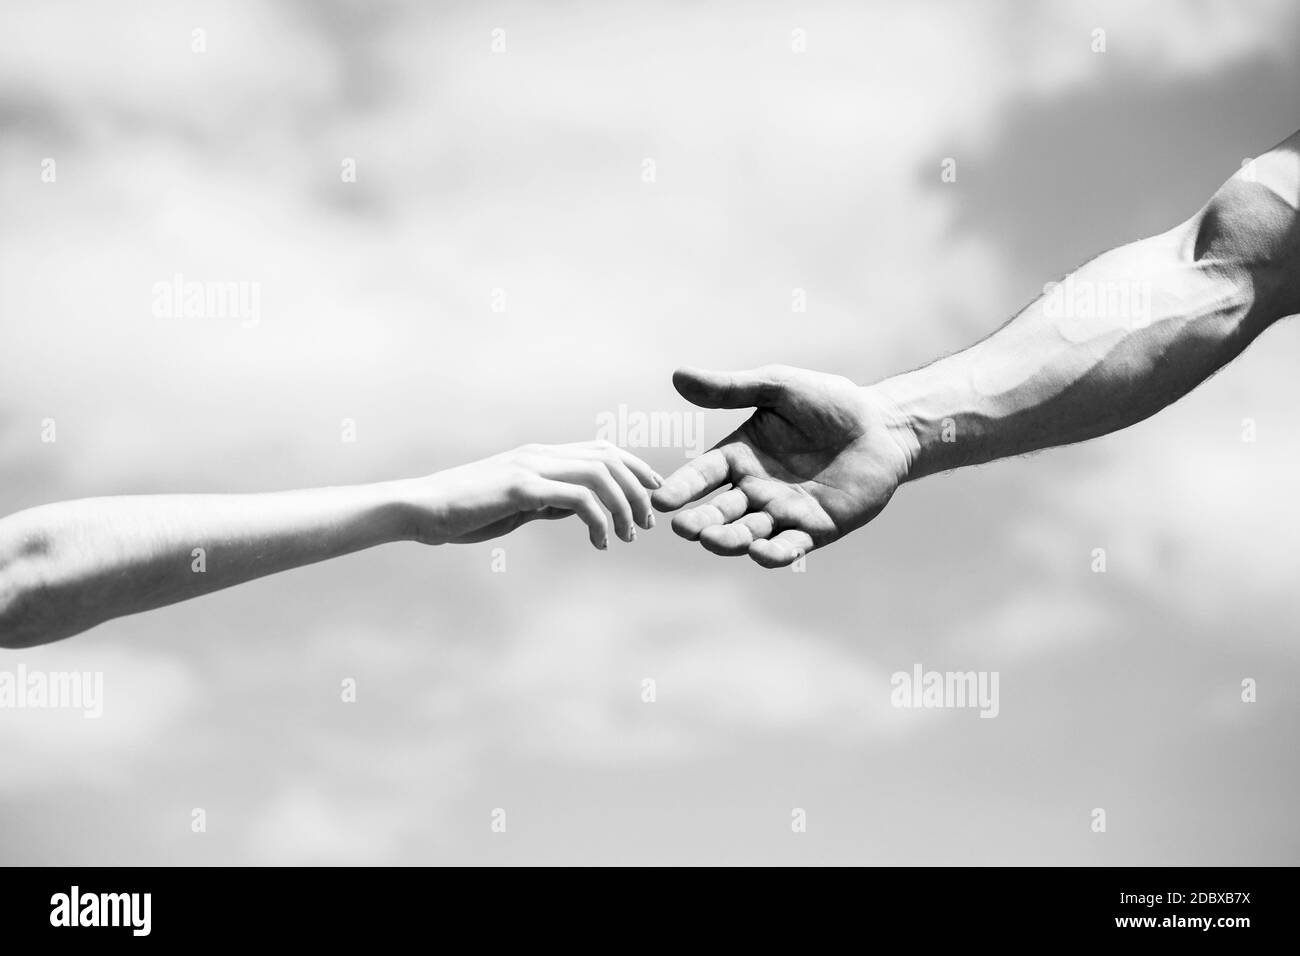 Giving a helping hand. Lending a helping hand. Solidarity, compassion, and charity, rescue. Black and white Stock Photo